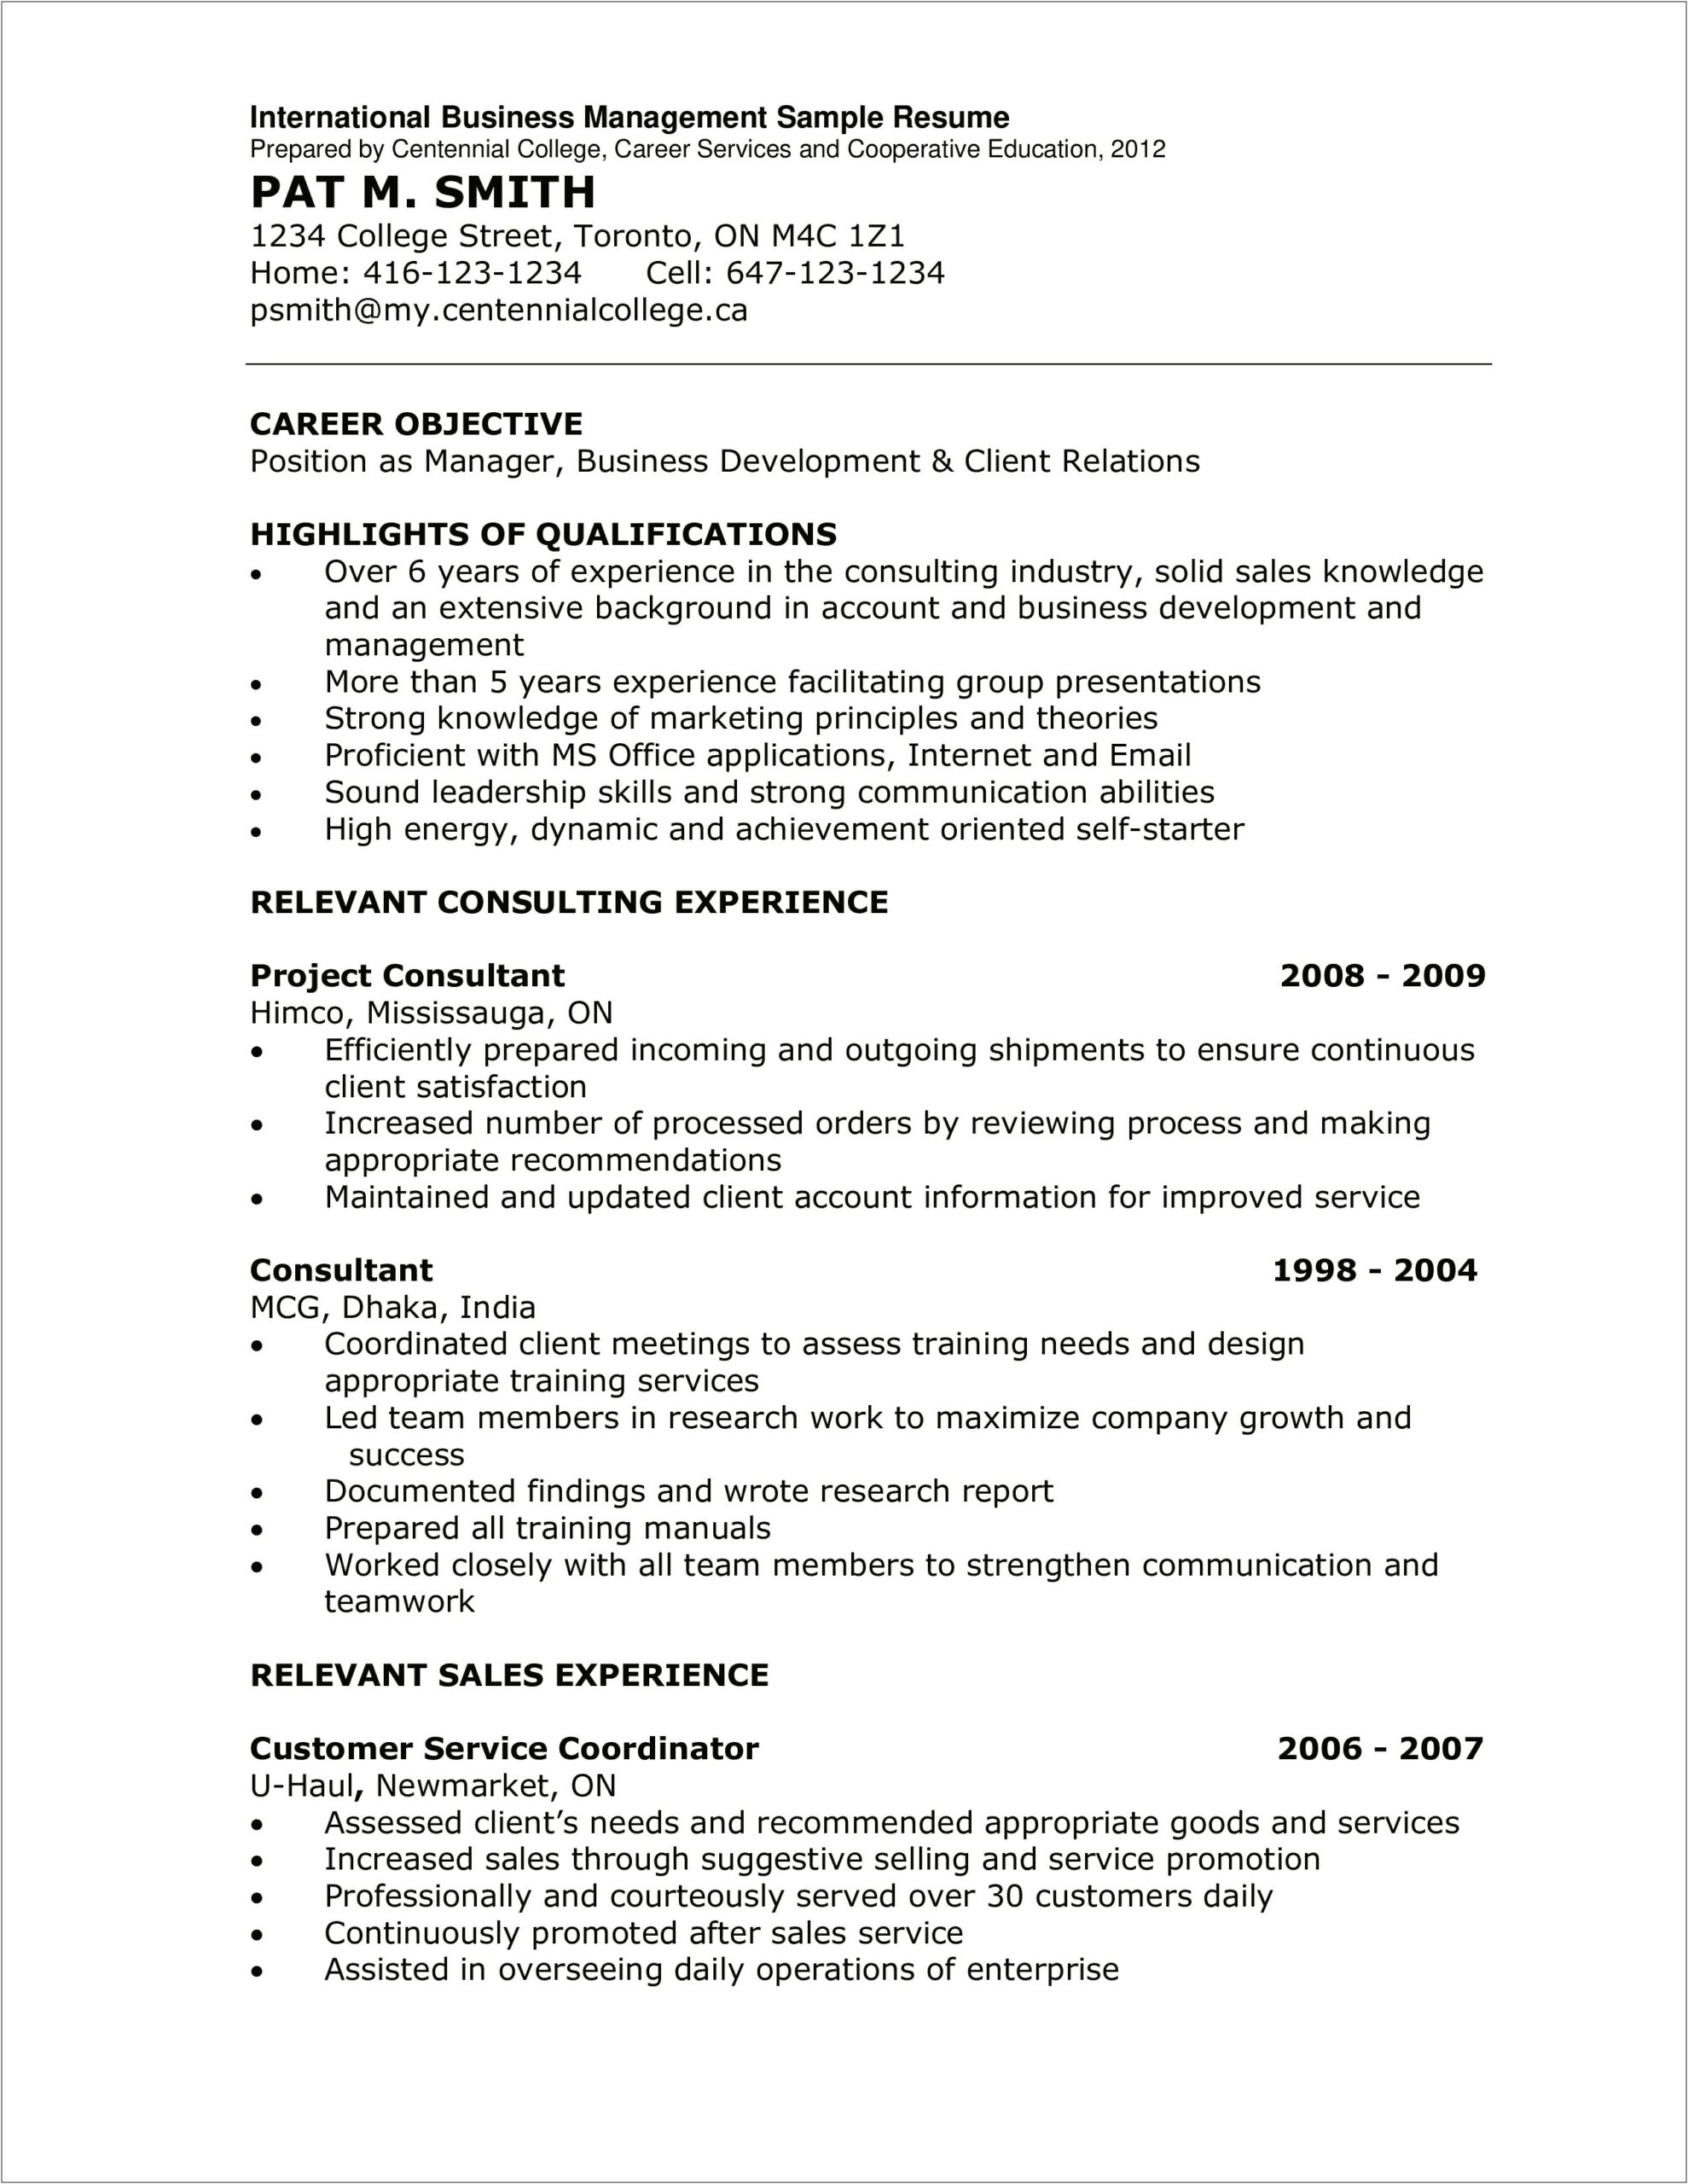 Examples Of The Achievement Style Resume